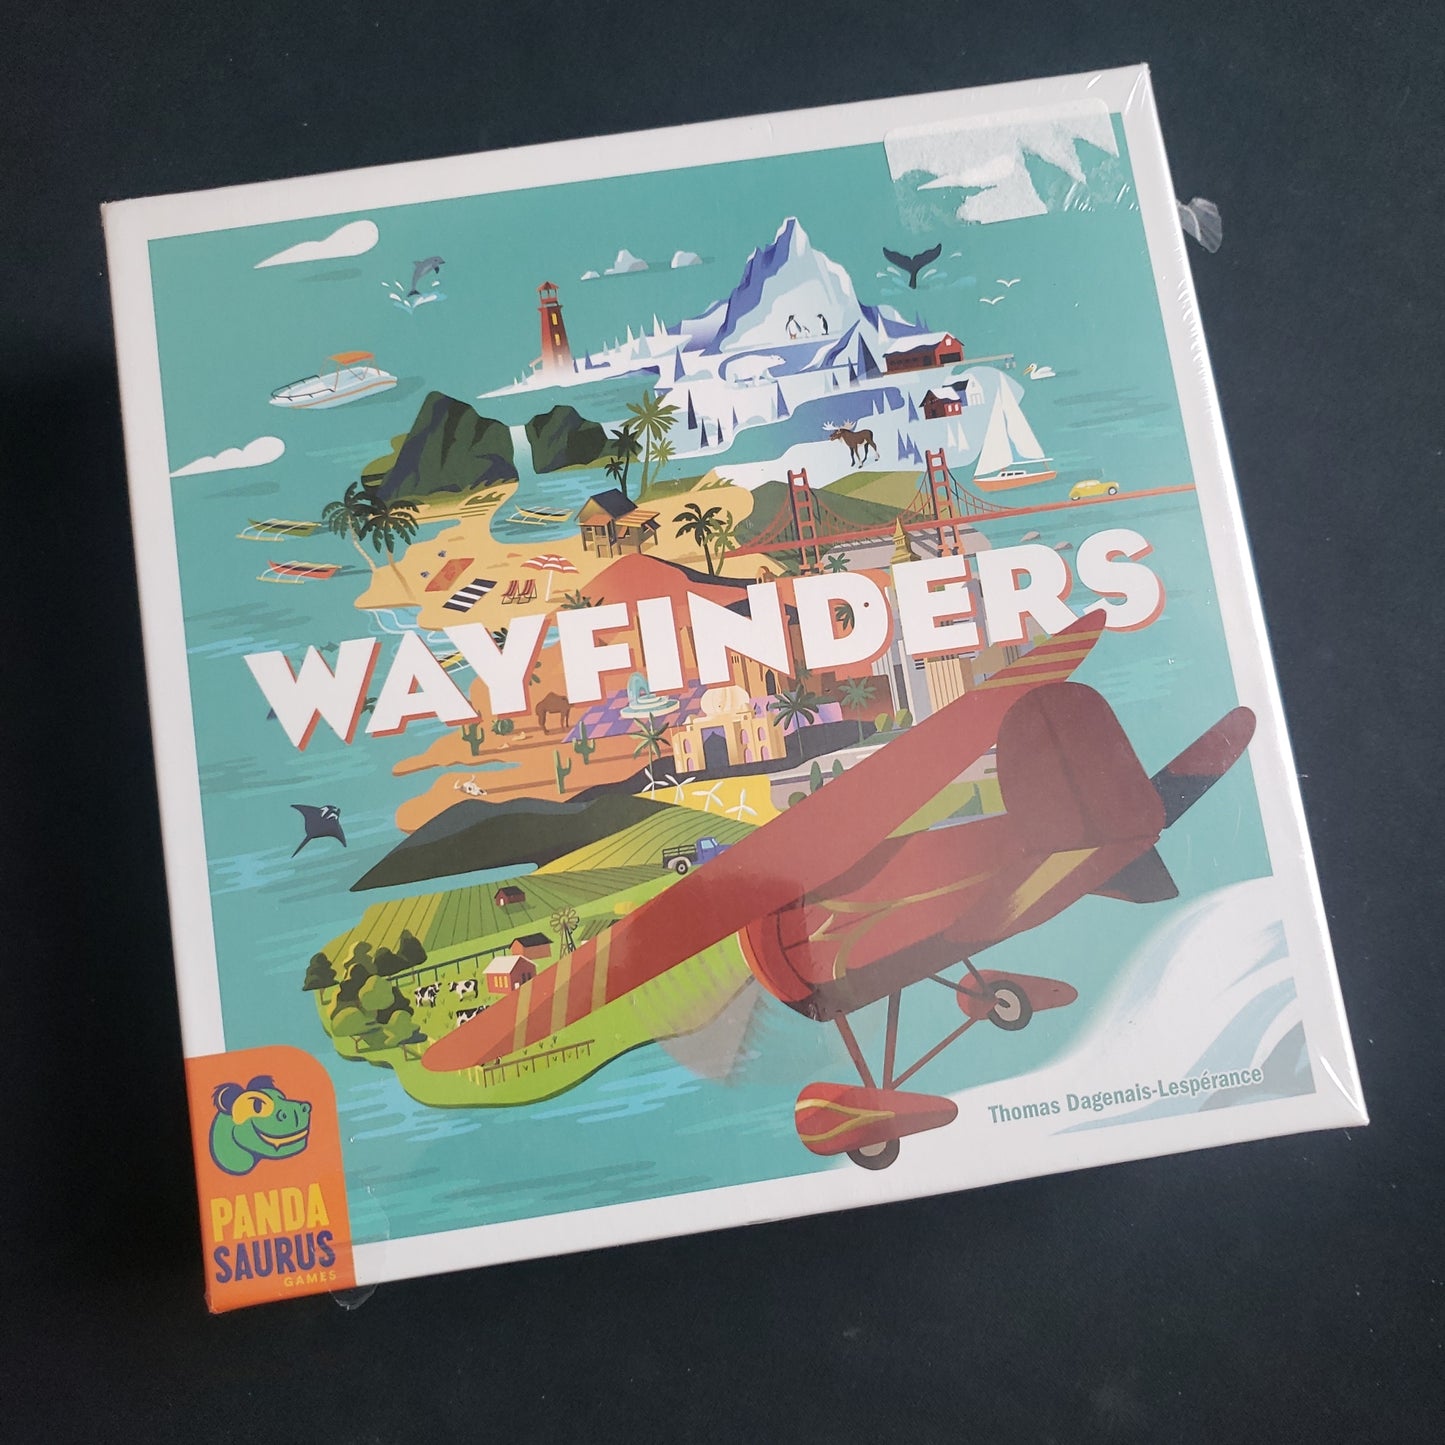 Image shows the front cover of the box of the Wayfinders board game